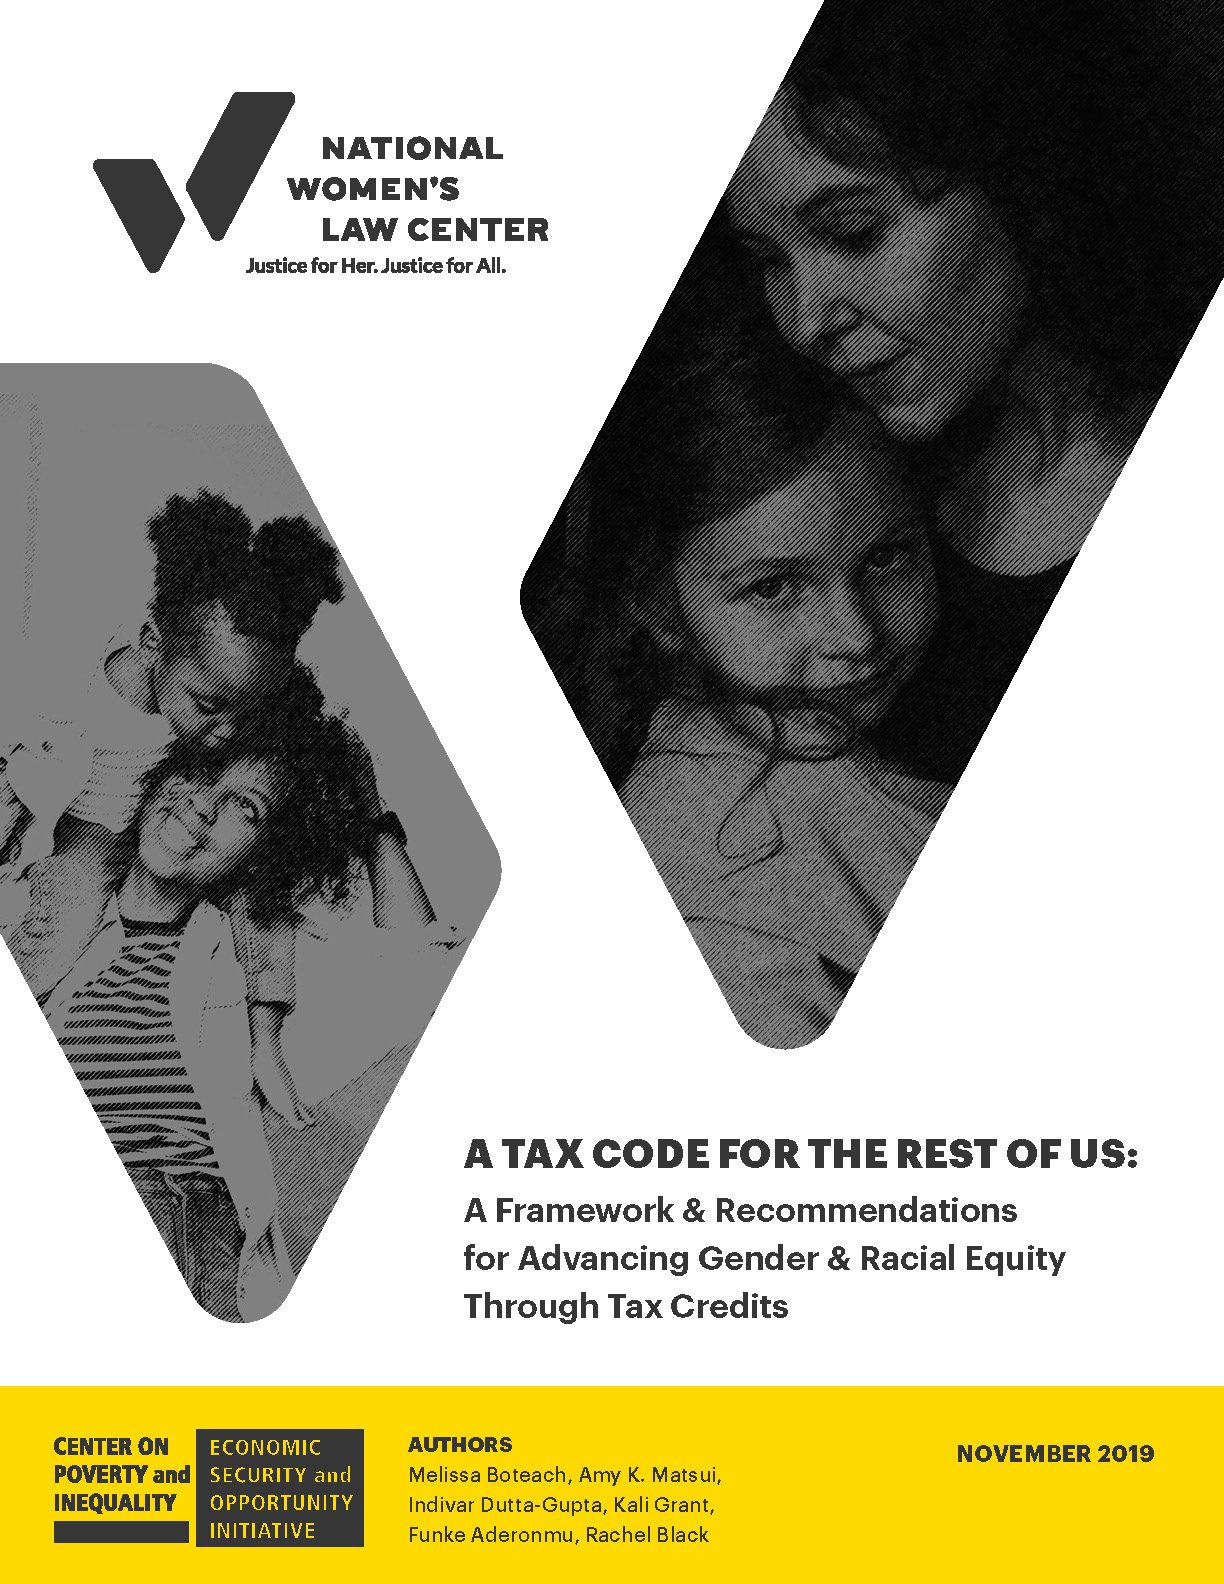 Cover of Tax Code for the Rest of Us report